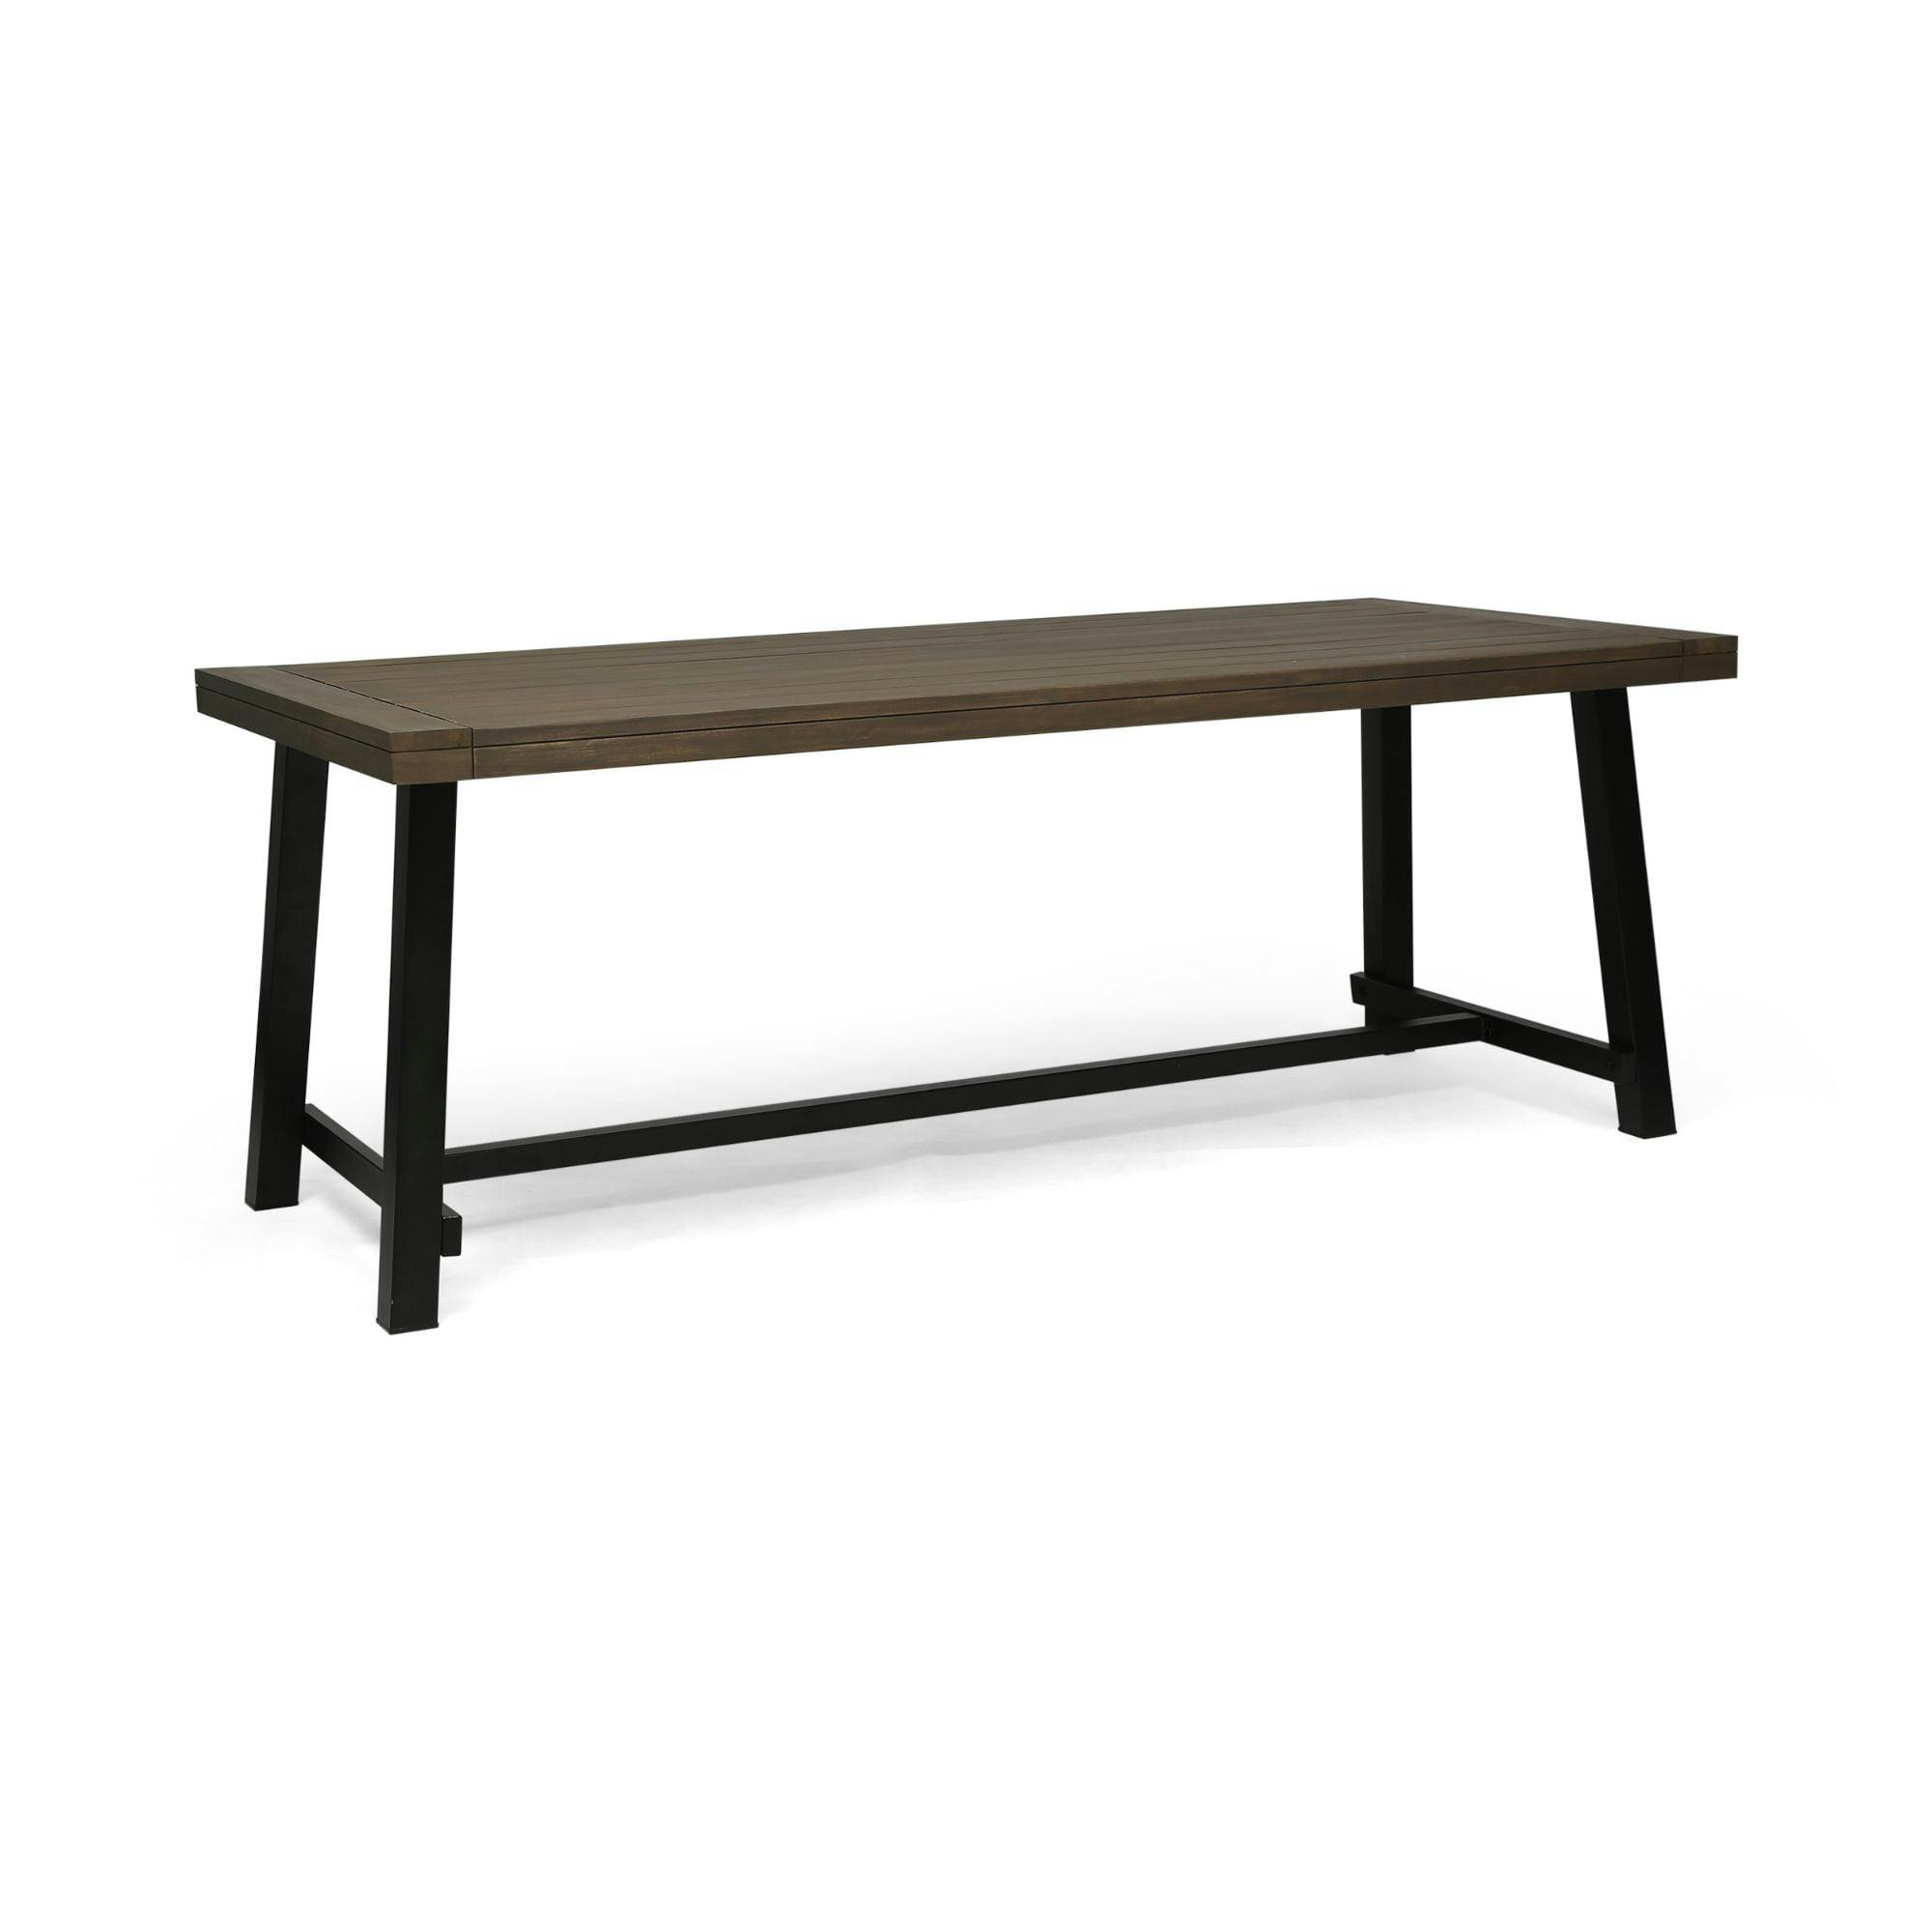 Modern Charcoal Gray and Black Rectangular Outdoor Dining Table, 79"